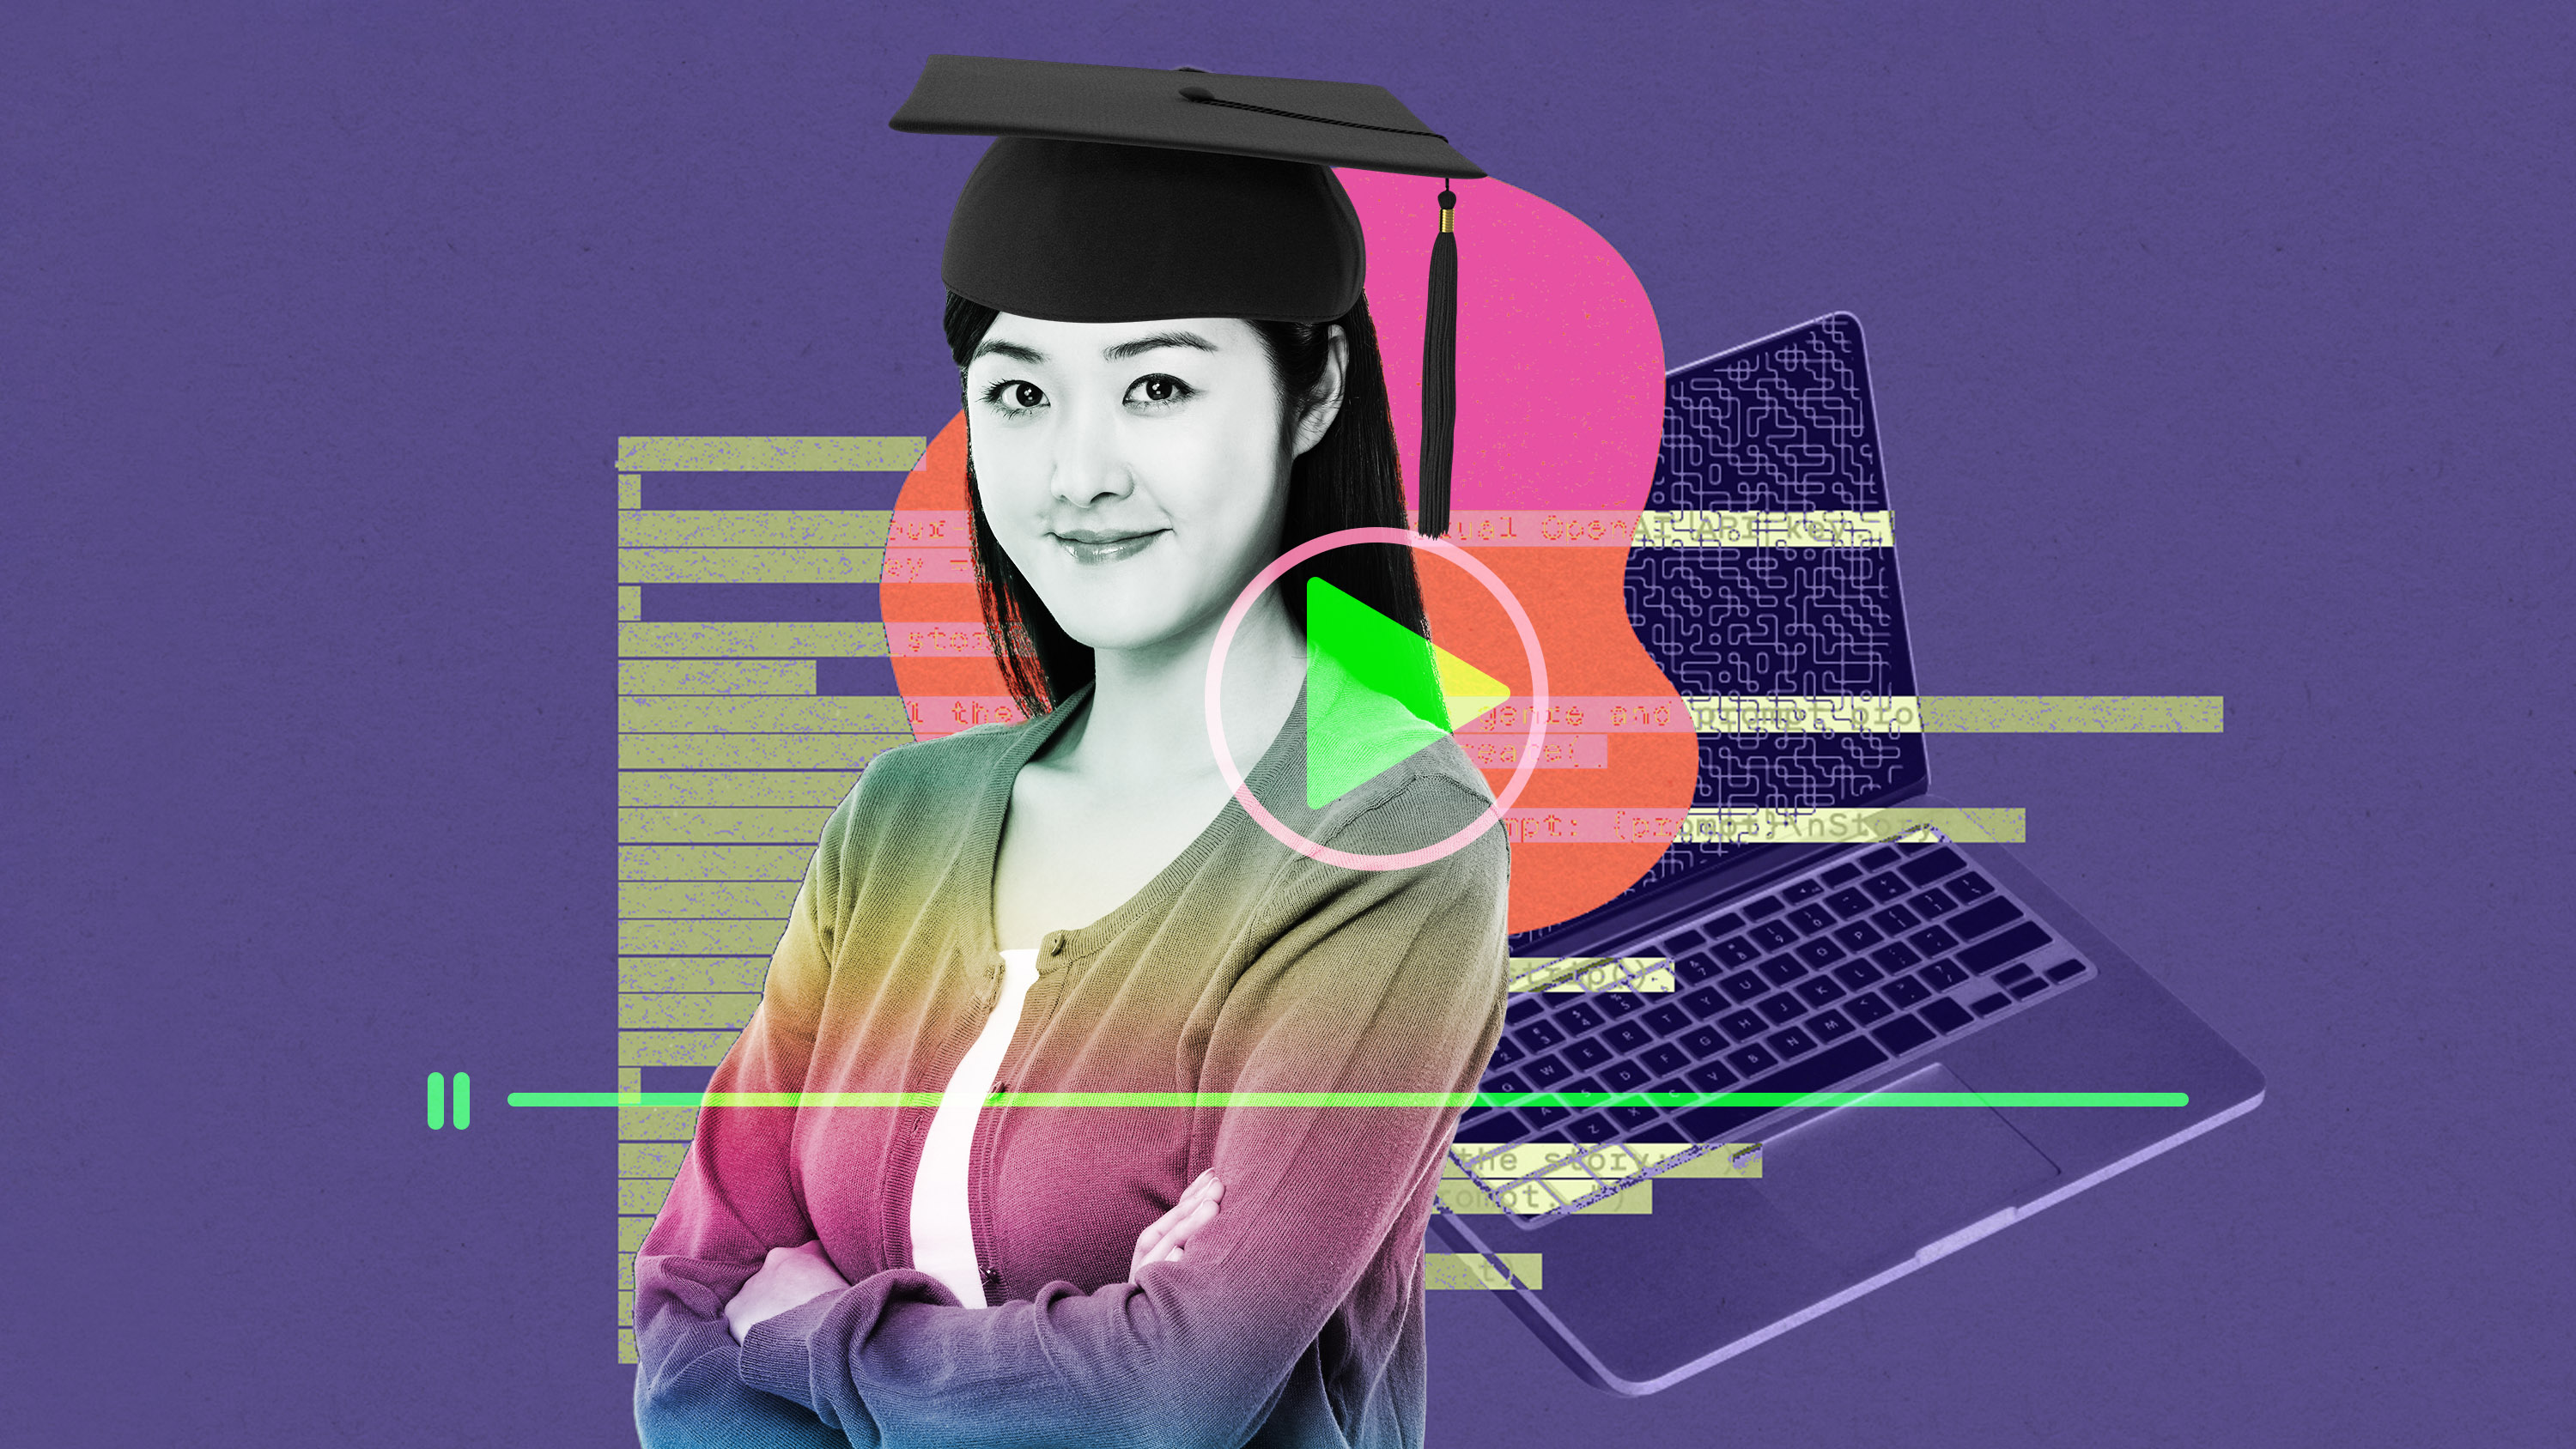 ad for glitchy online course with girl in graduation cap and a laptop